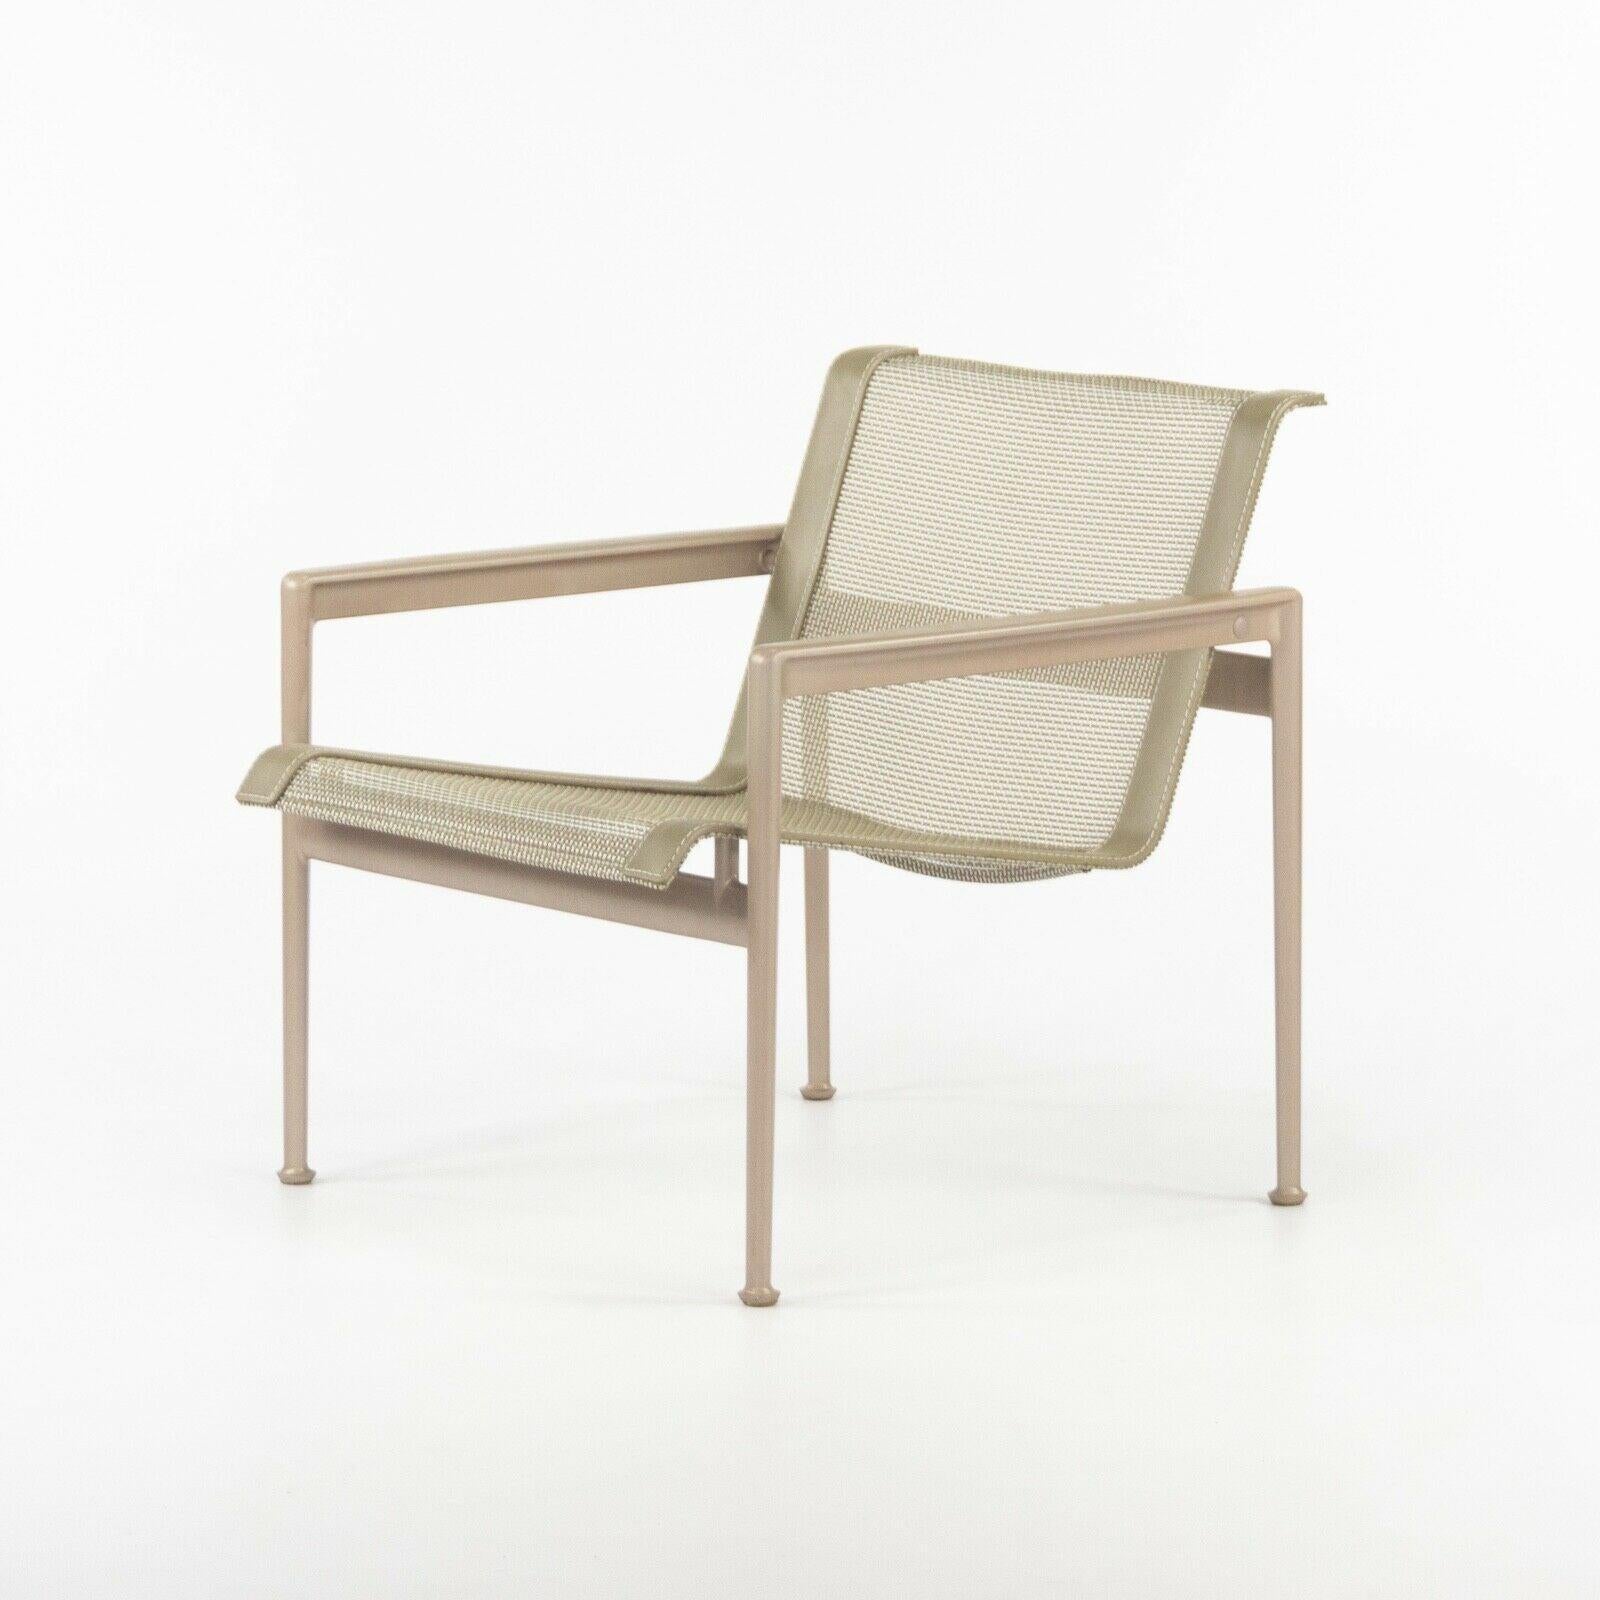 Listed for sale is a 2020 production lounge chair with arms designed by Richard Schultz and produced by Knoll. This is a unique example with beige powder coated frame and beige sling as well. The chair is in excellent condition with few if any signs